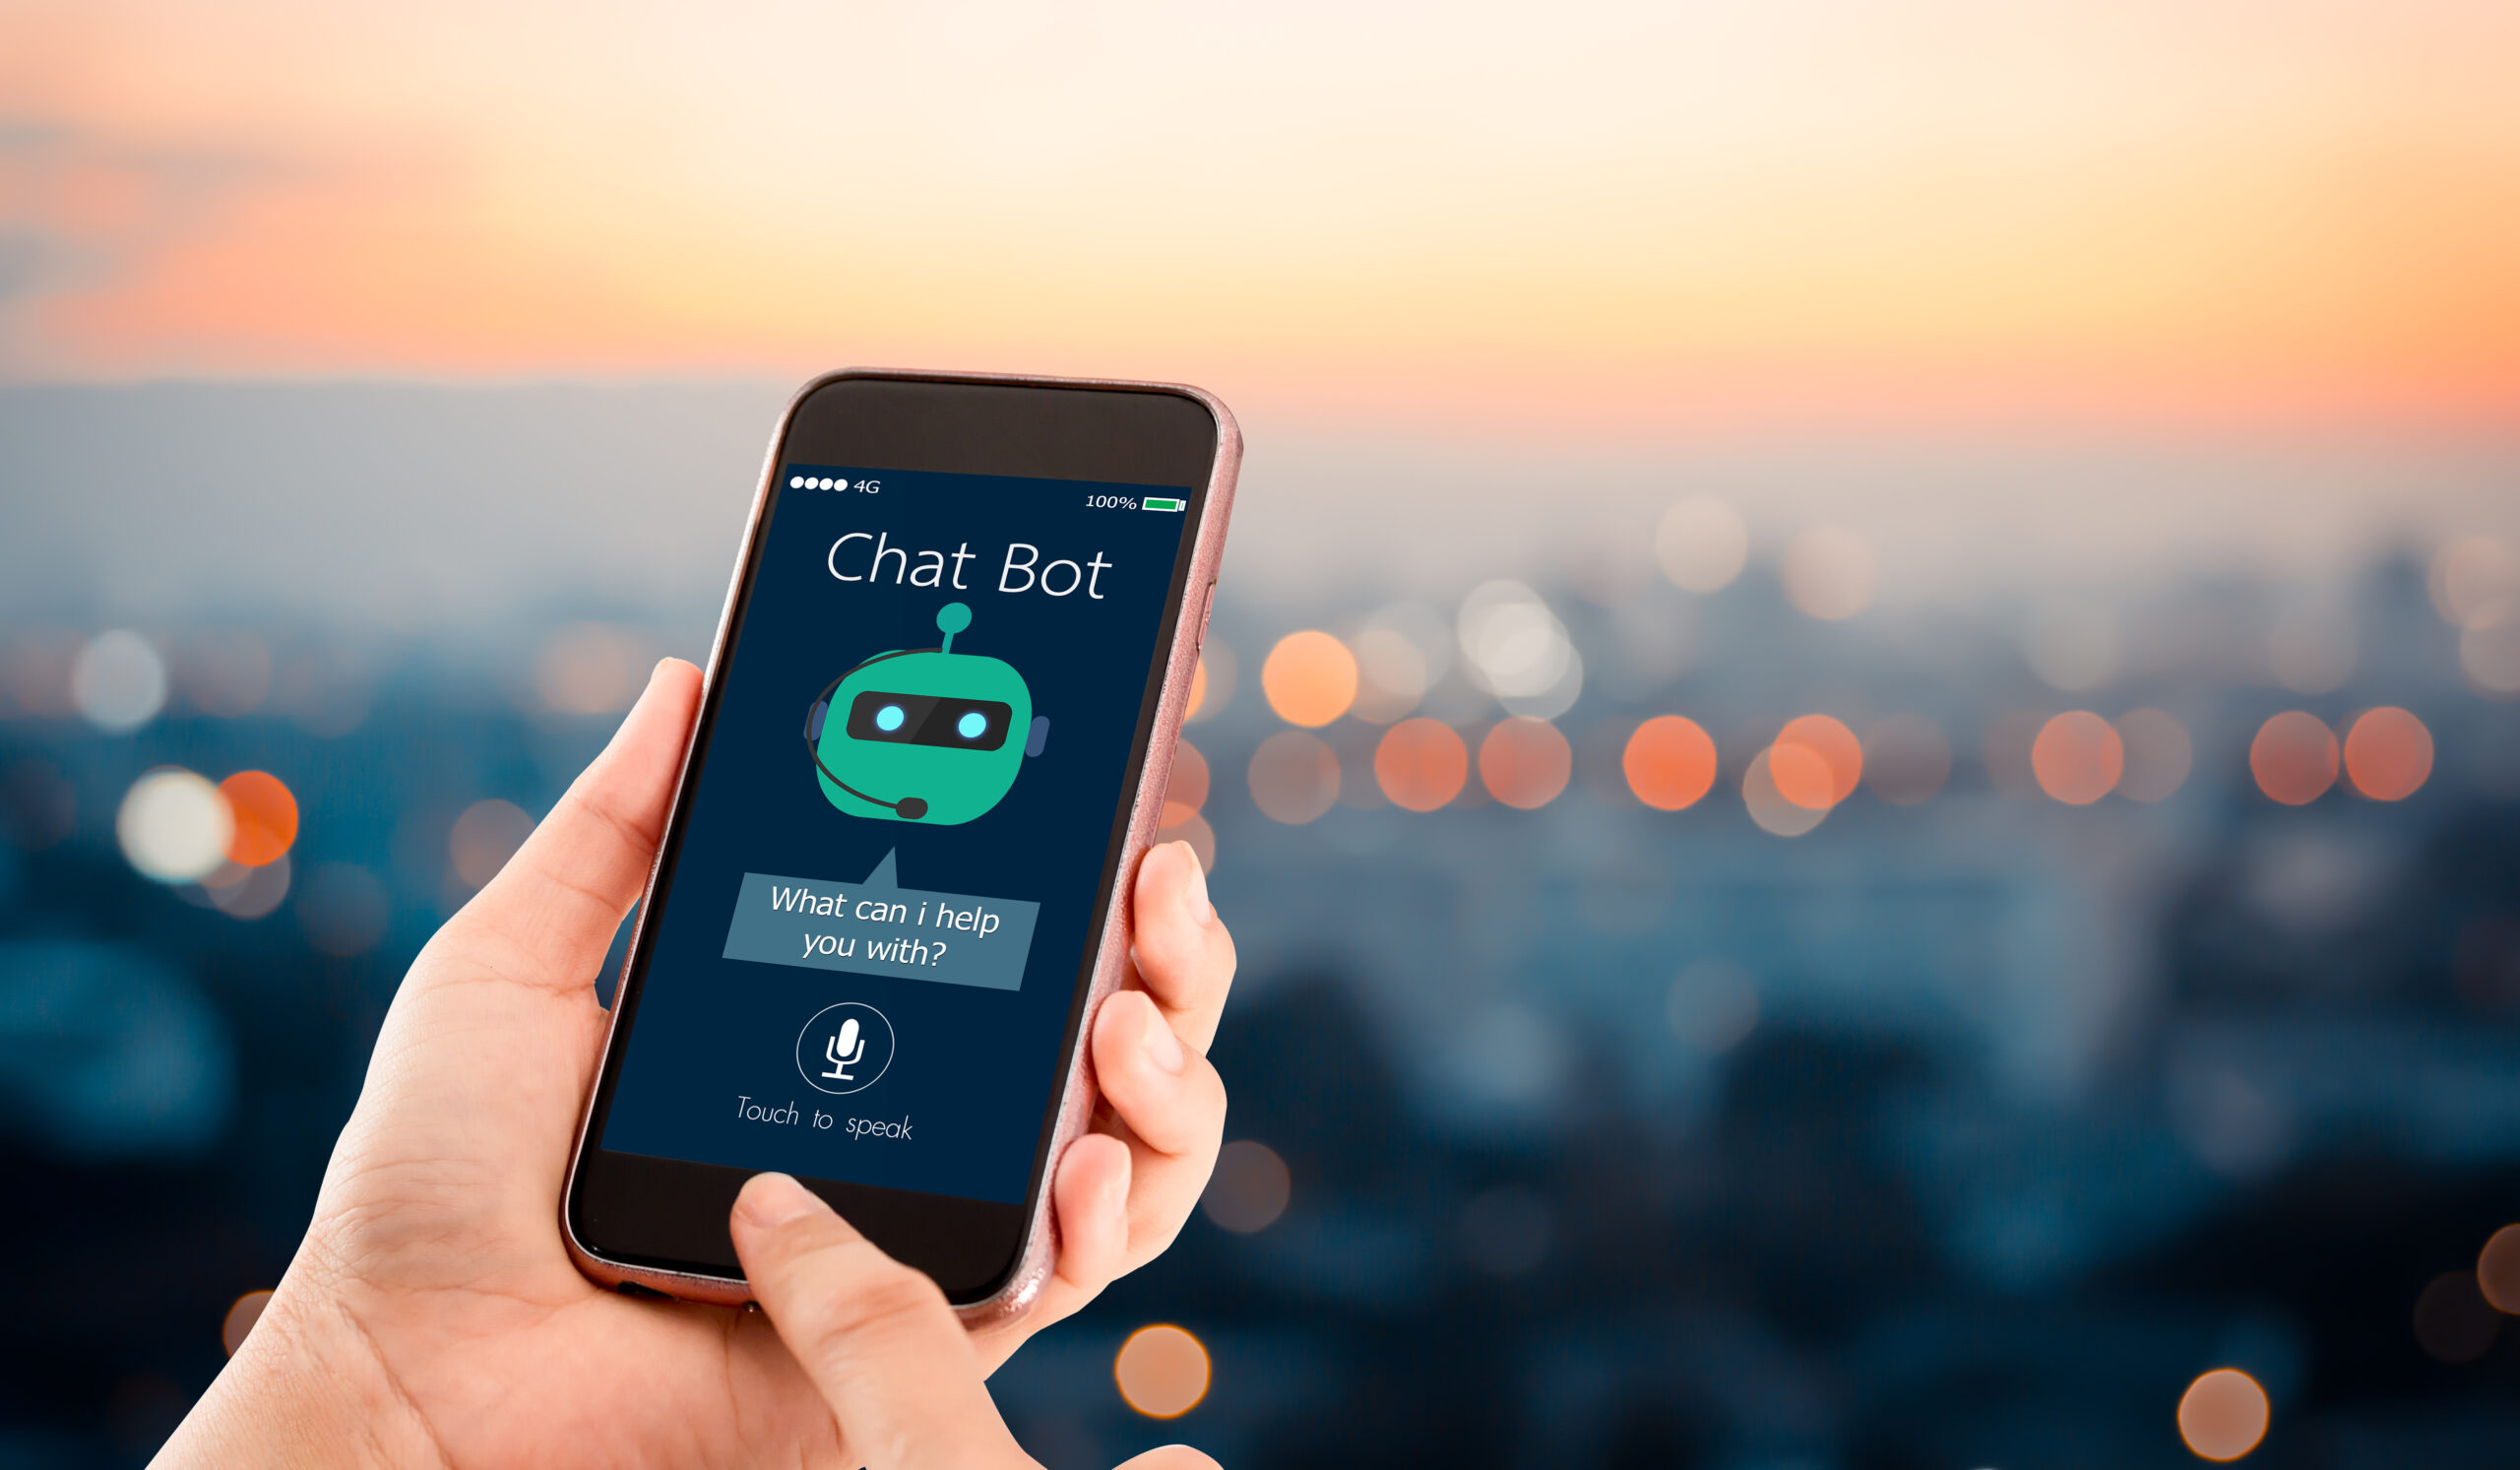 Create A Chatbot Android App - Create A Chatbot | Bodaswasuas